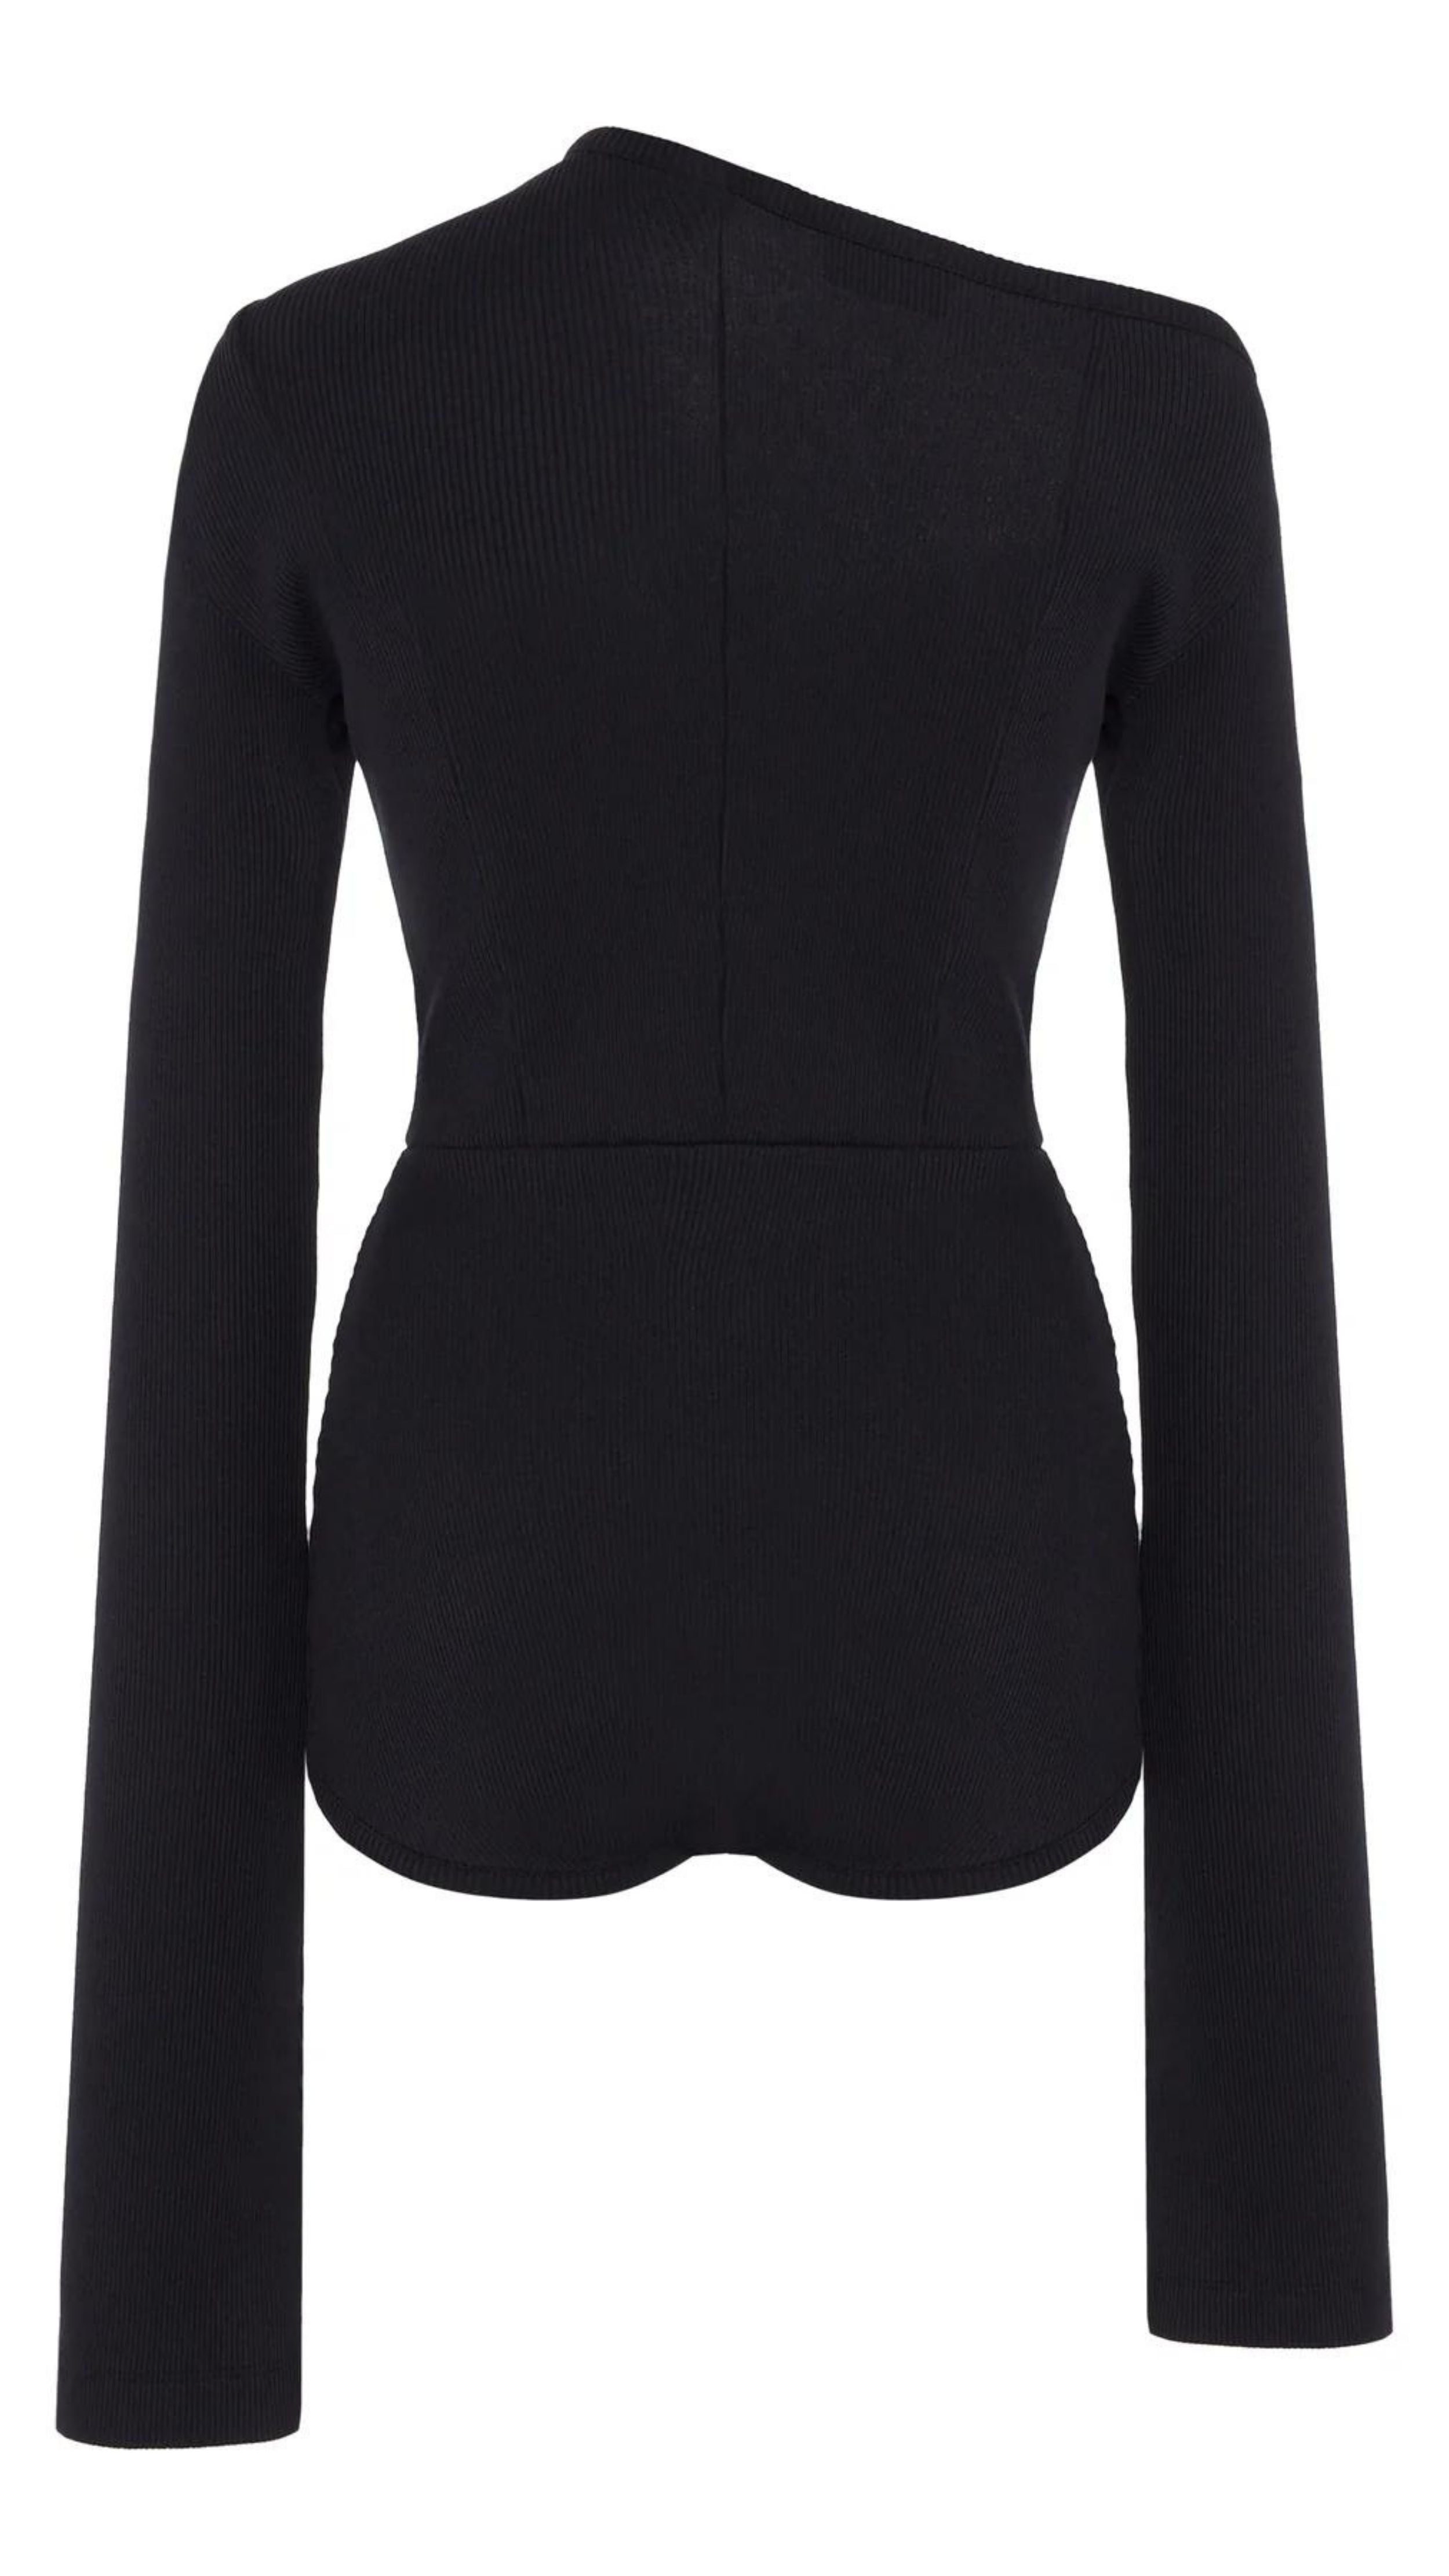 AWAKE Mode Body Suit with Asymmetrical Collar in Black. 100% Cotton top with an asymmetrical collar. Slightly off shoulder on one side. Buttons up the front and extra long sleeves. Back product photo